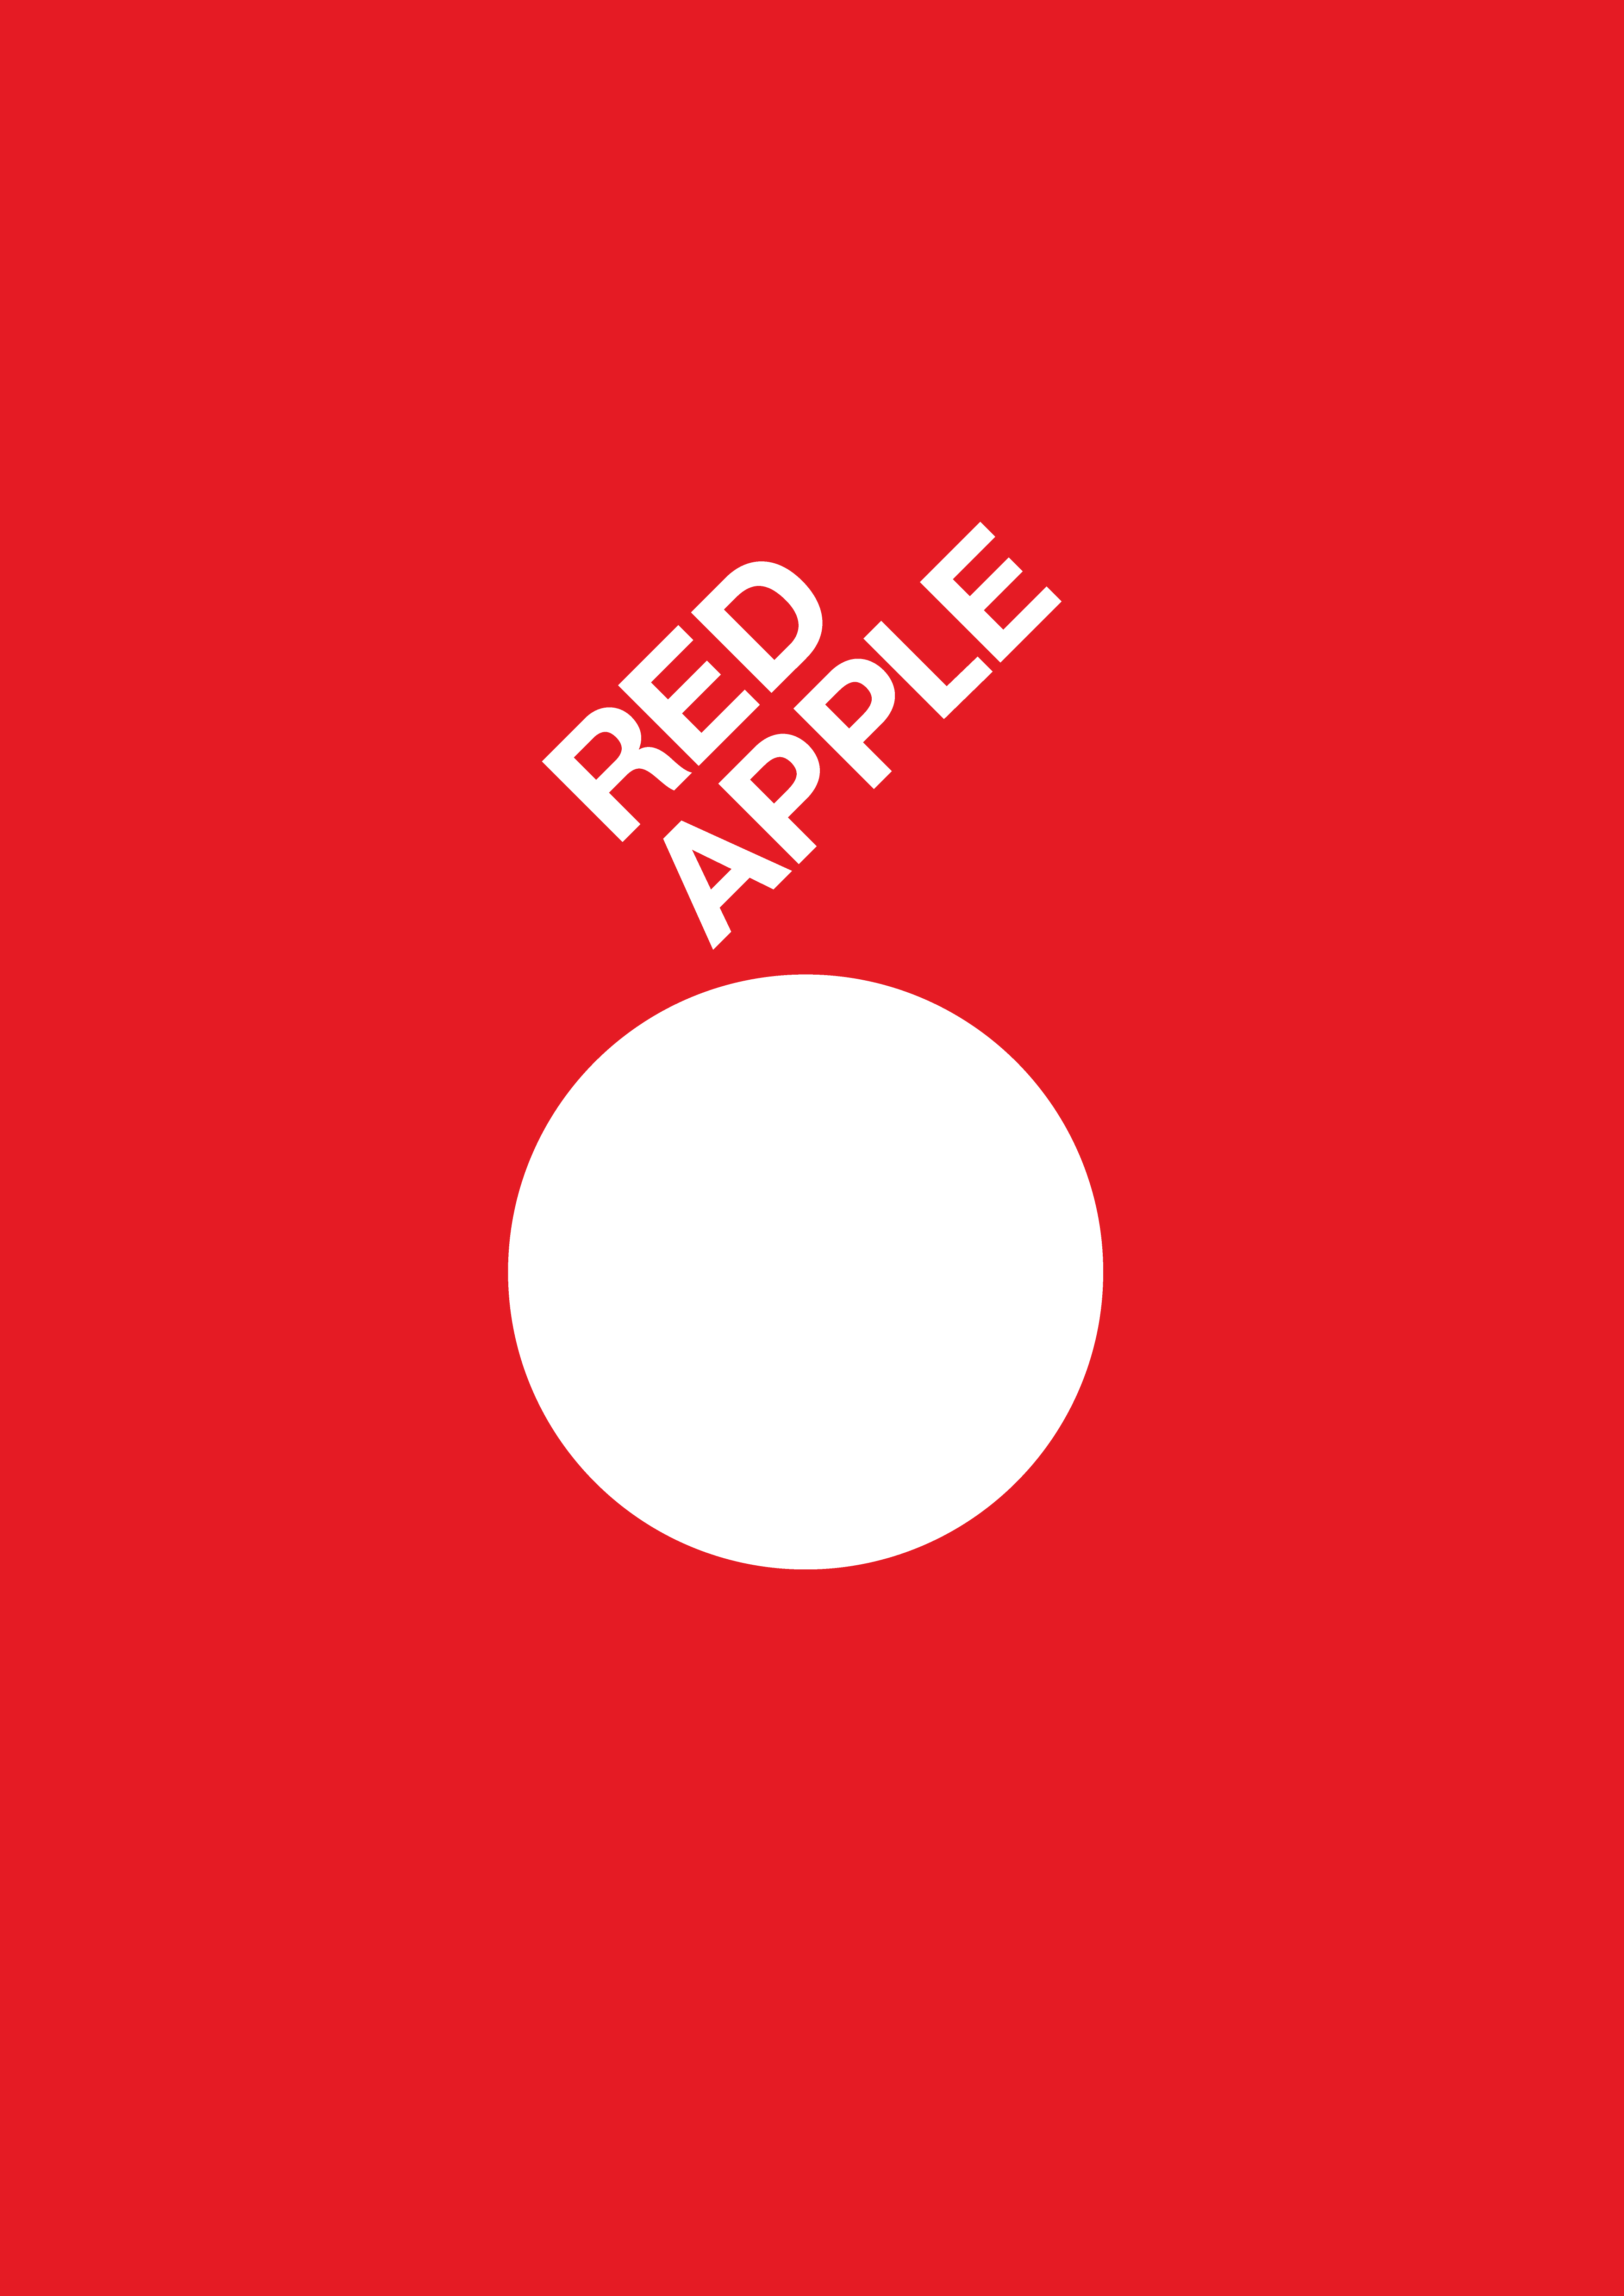    Red Apple 2020    !